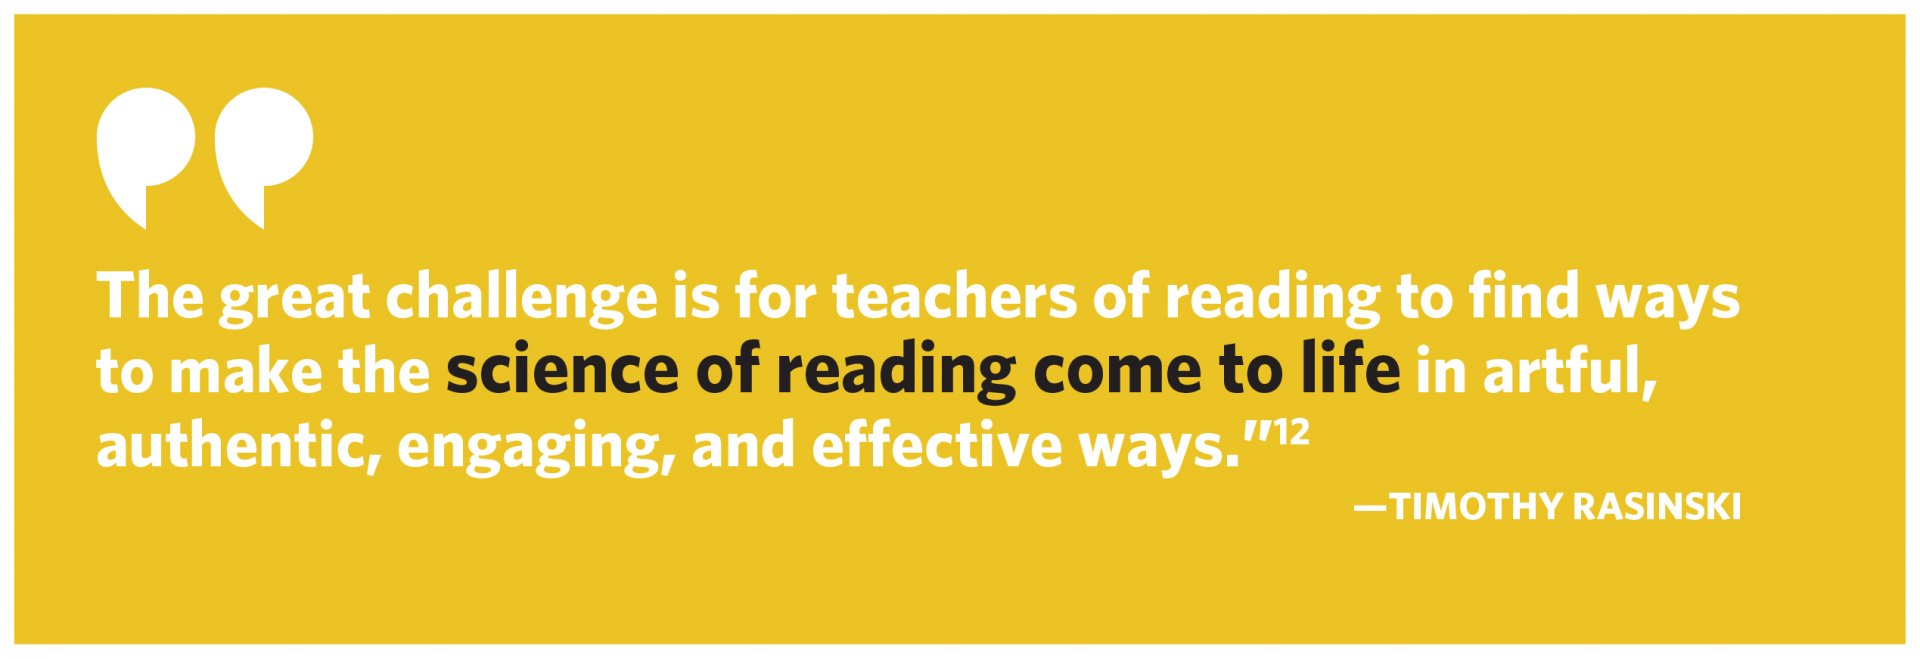 Quote: The great challenge is for teachers of reading to find ways to make the science of reading come to life in artful, authentic, engaging, and effective ways.”